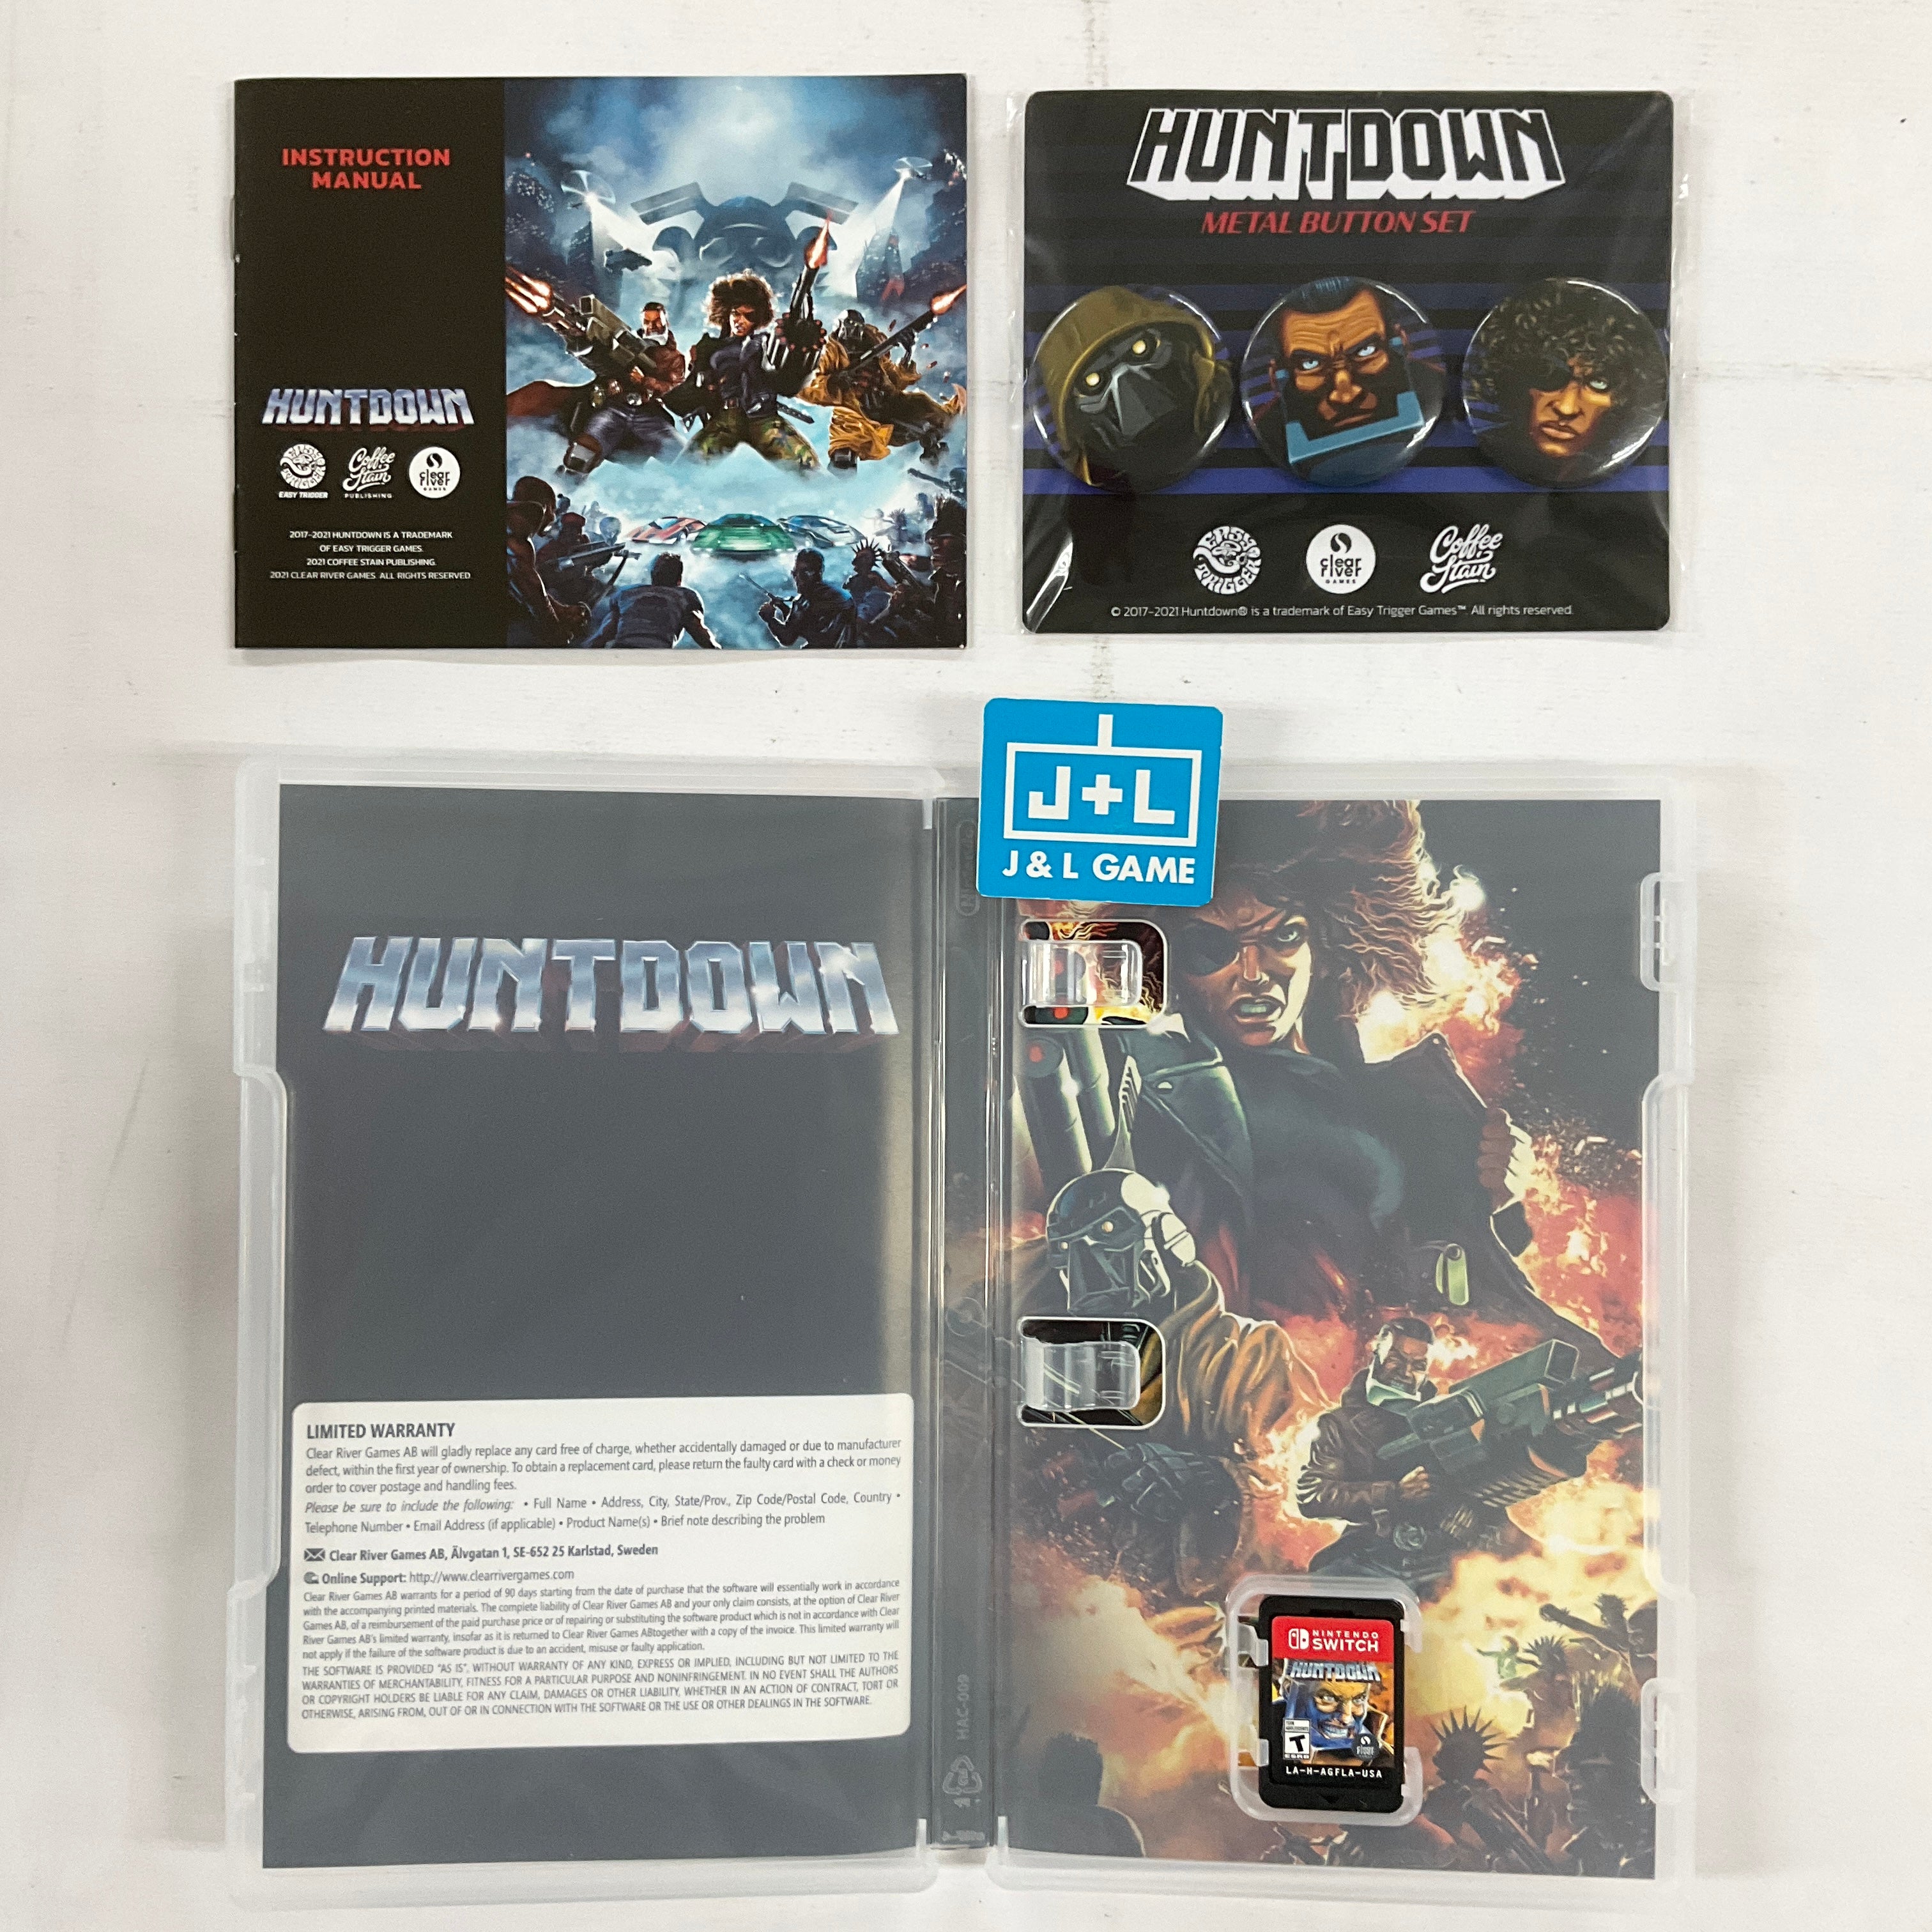 Huntdown - (NSW) Nintendo Switch [UNBOXING] Video Games Crescent Marketing and Distribution   